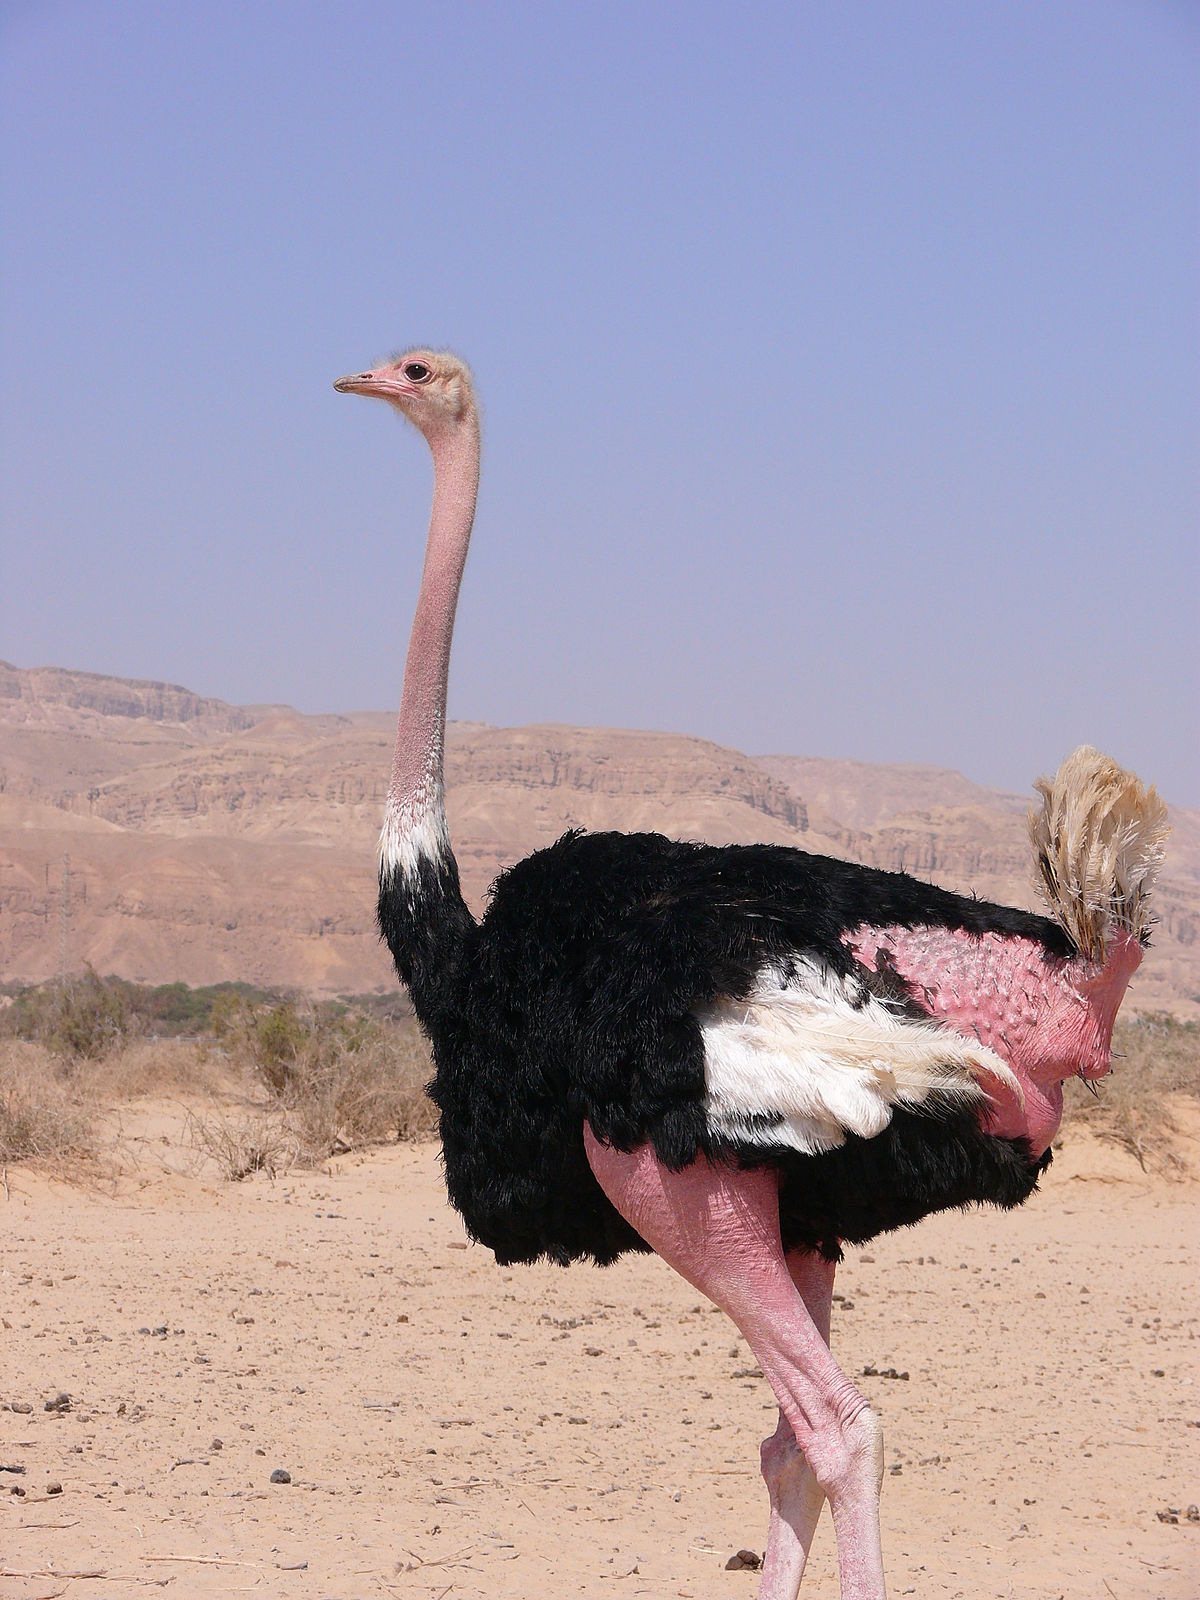 When did the ostrich become extinct?